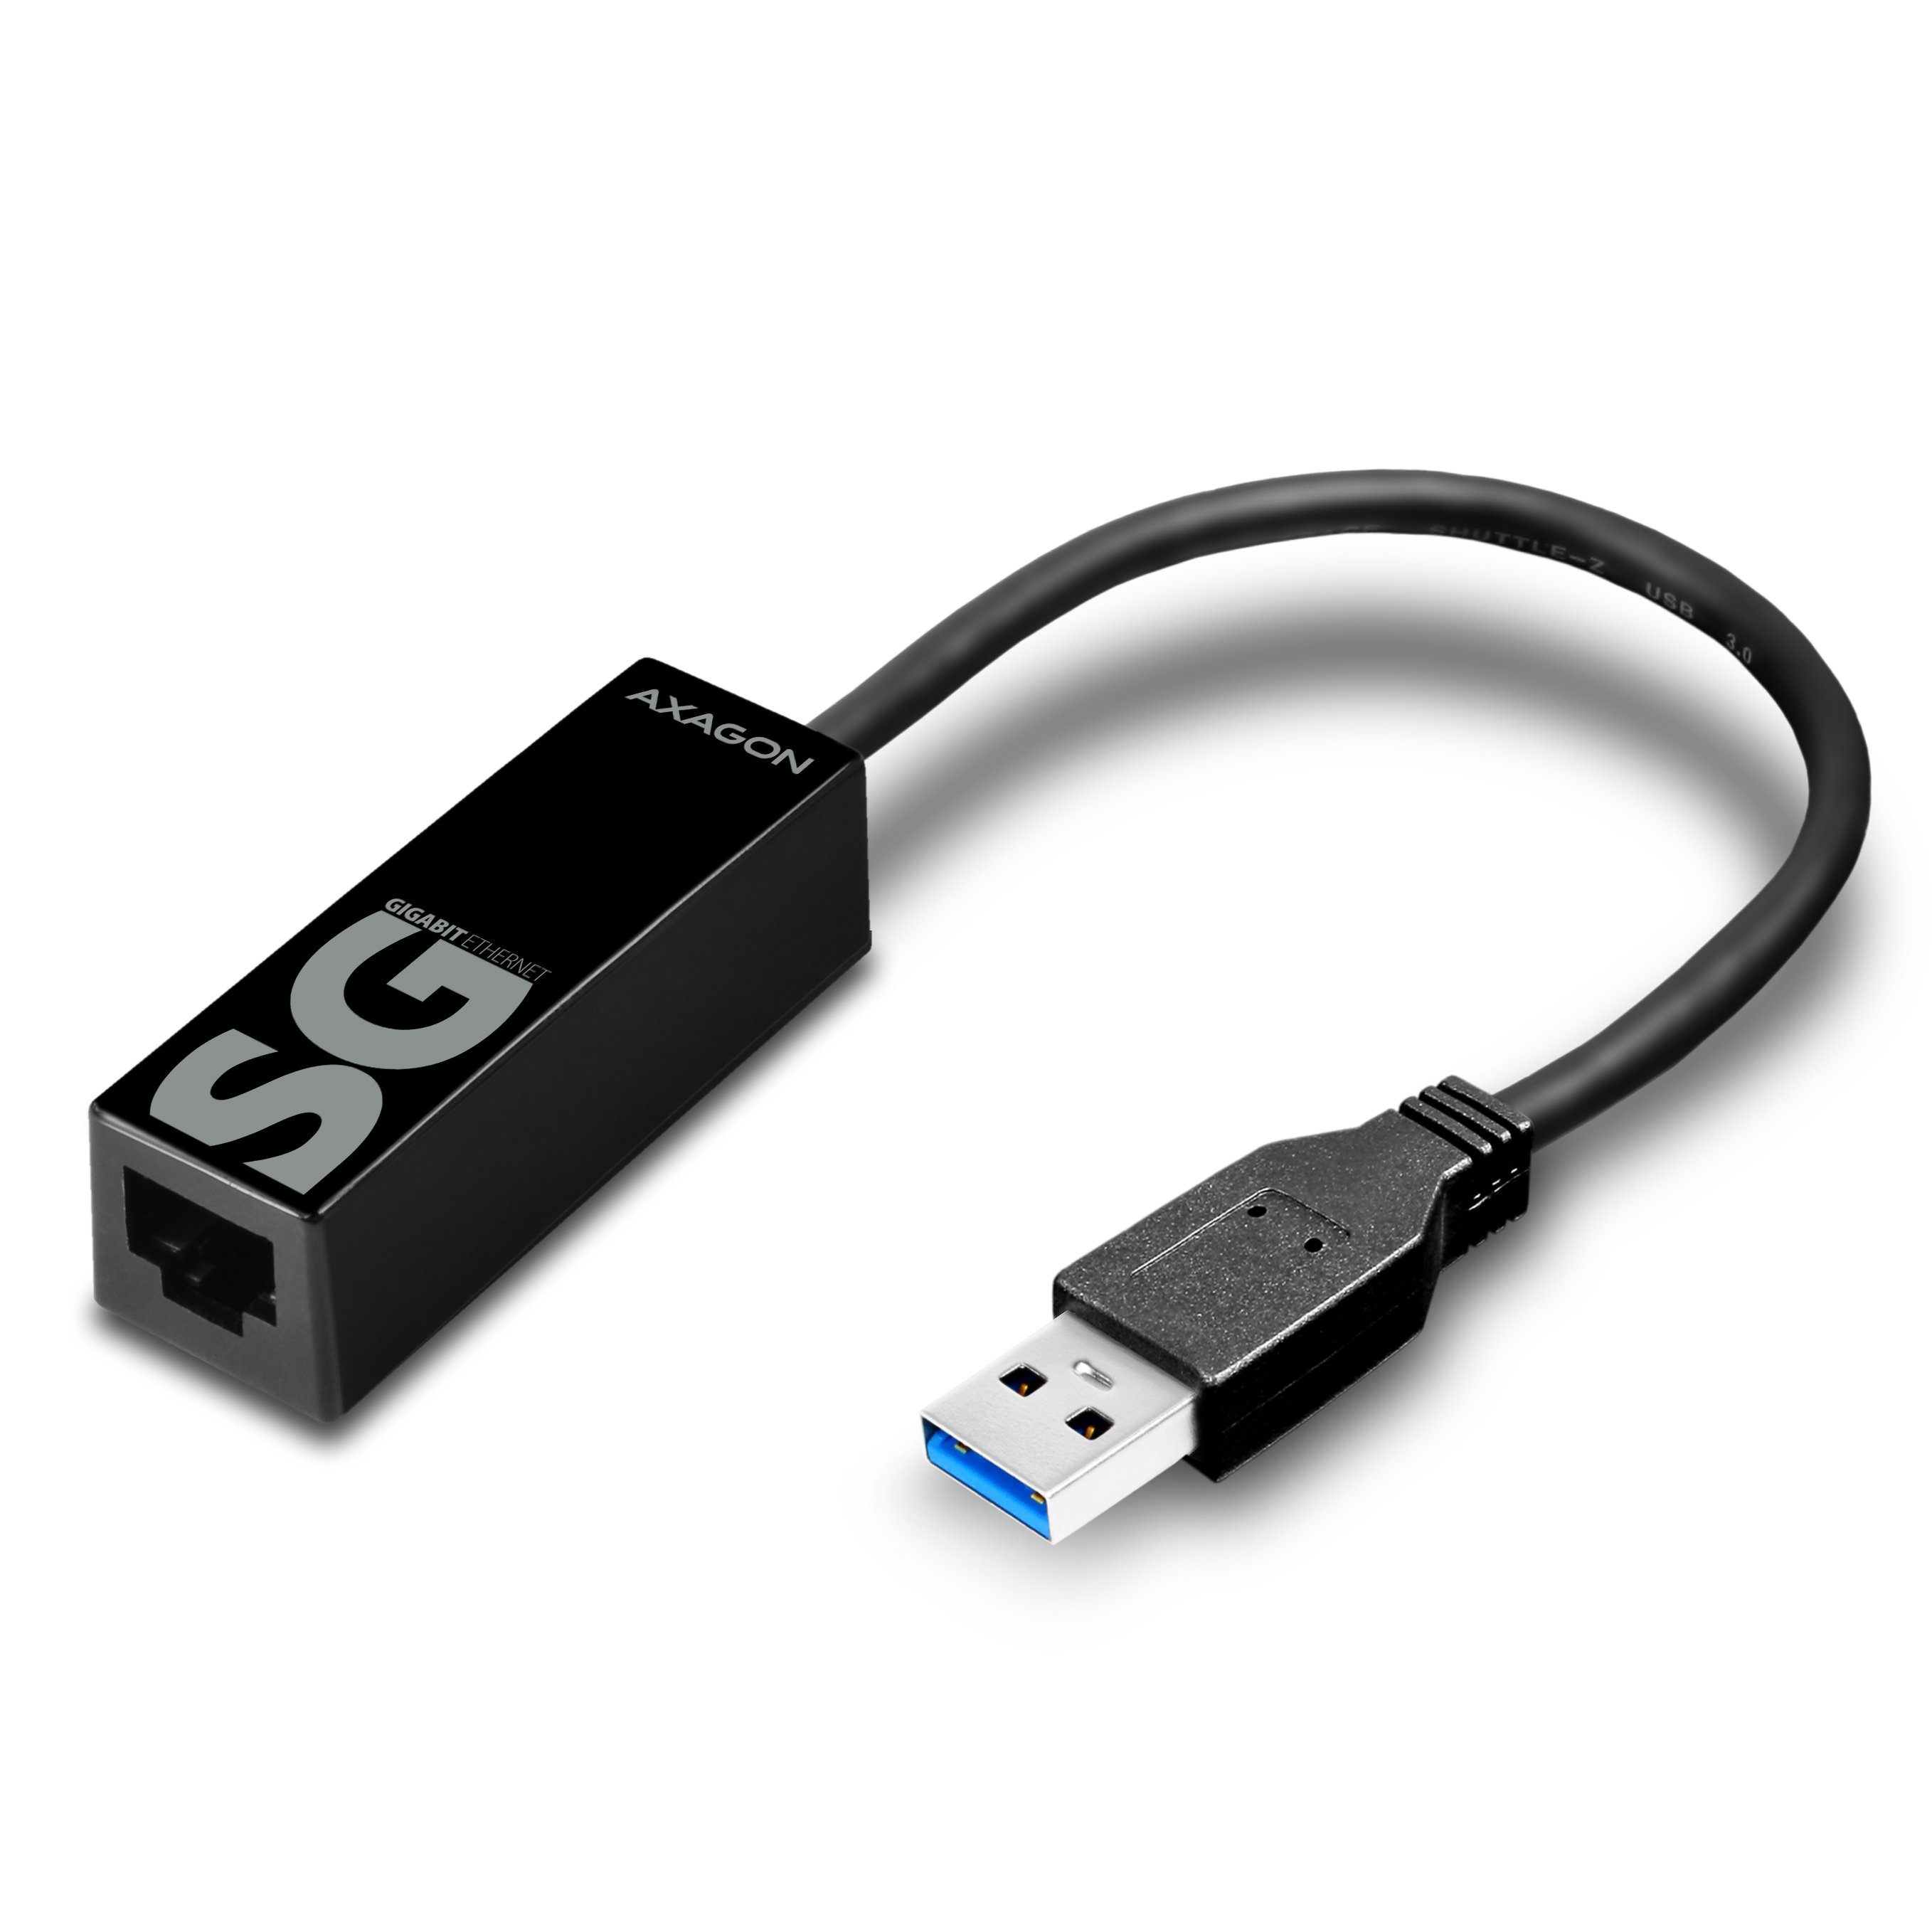 asix ax88179 usb 3.0 to gigabit ethernet adapter driver download